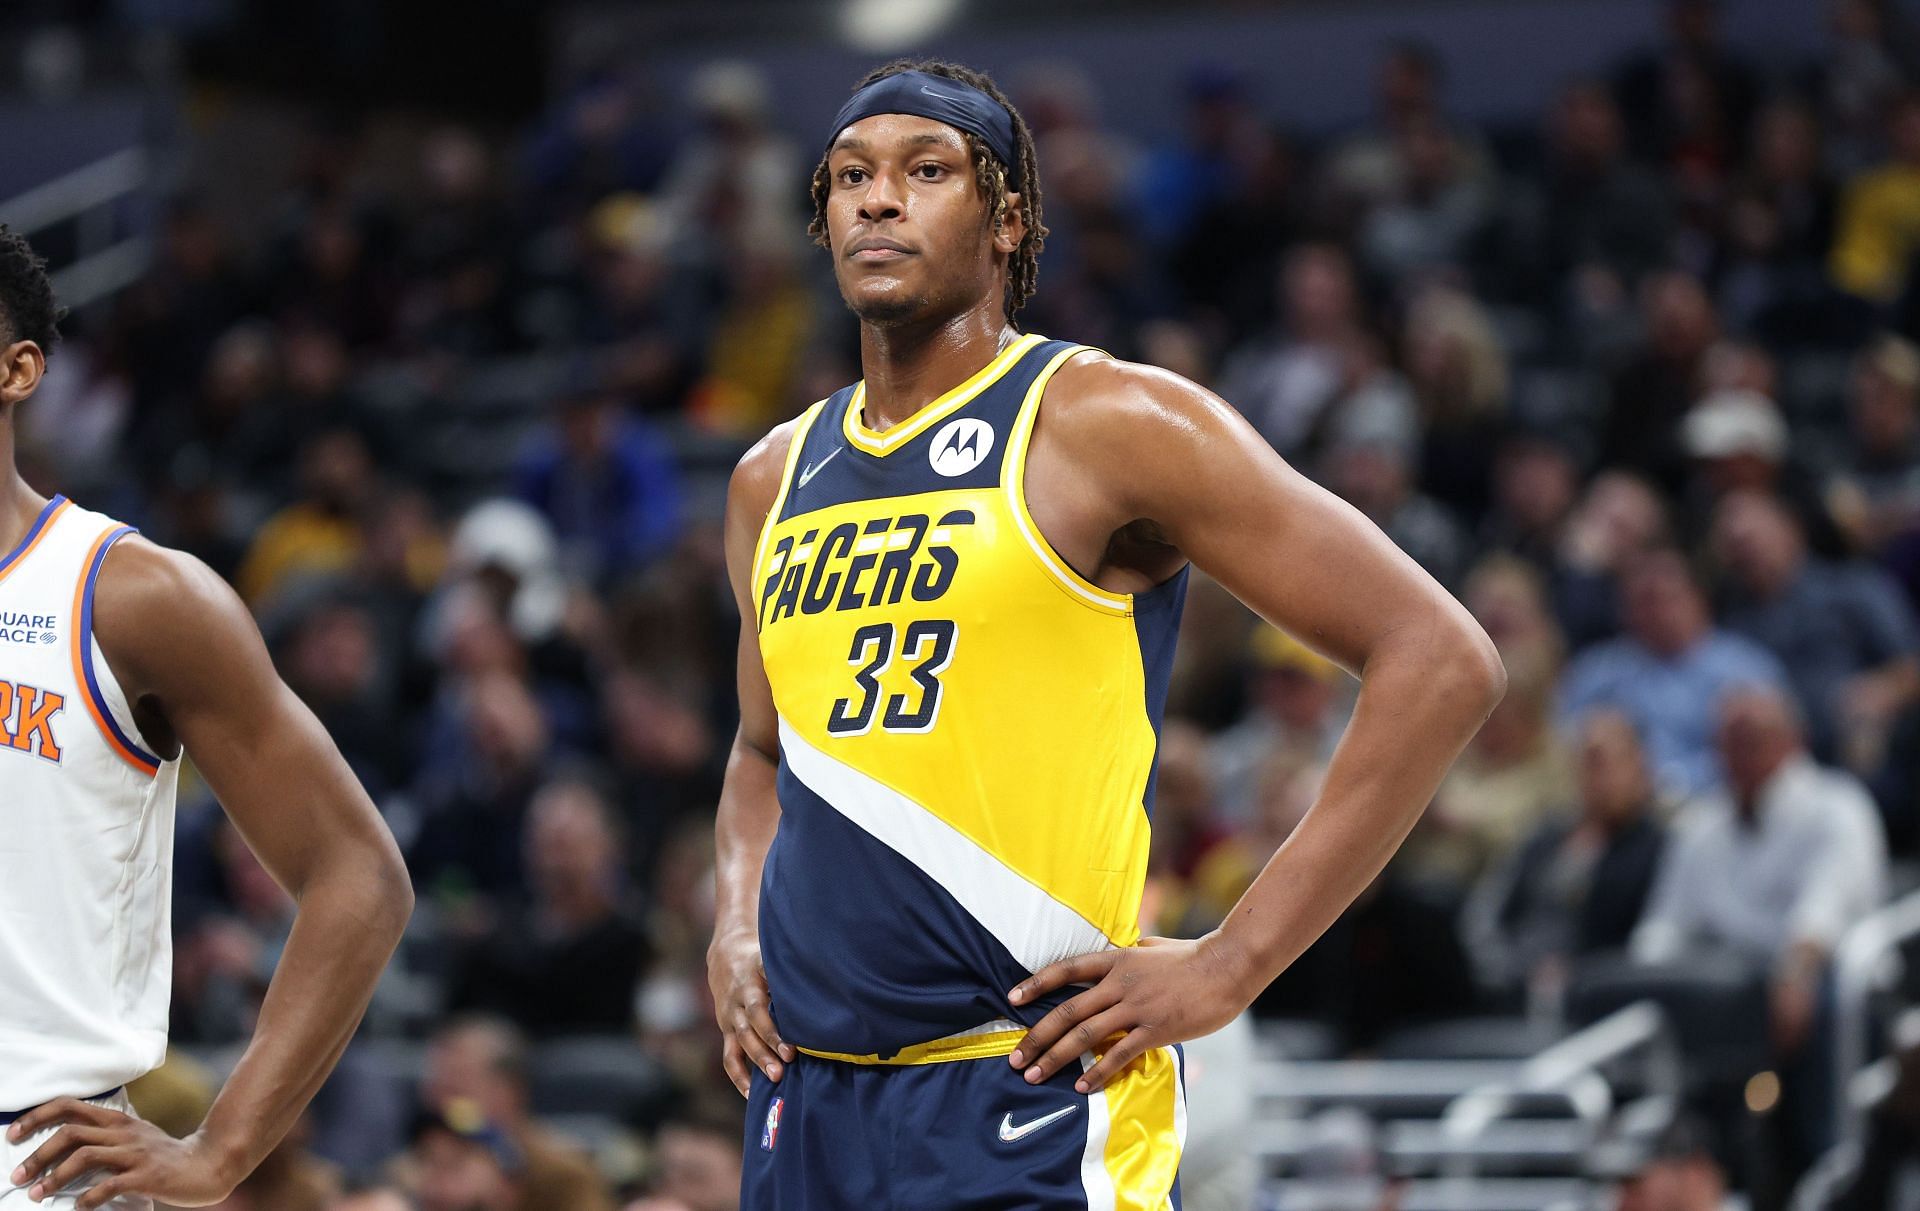 Indiana Pacers center Myles Turner